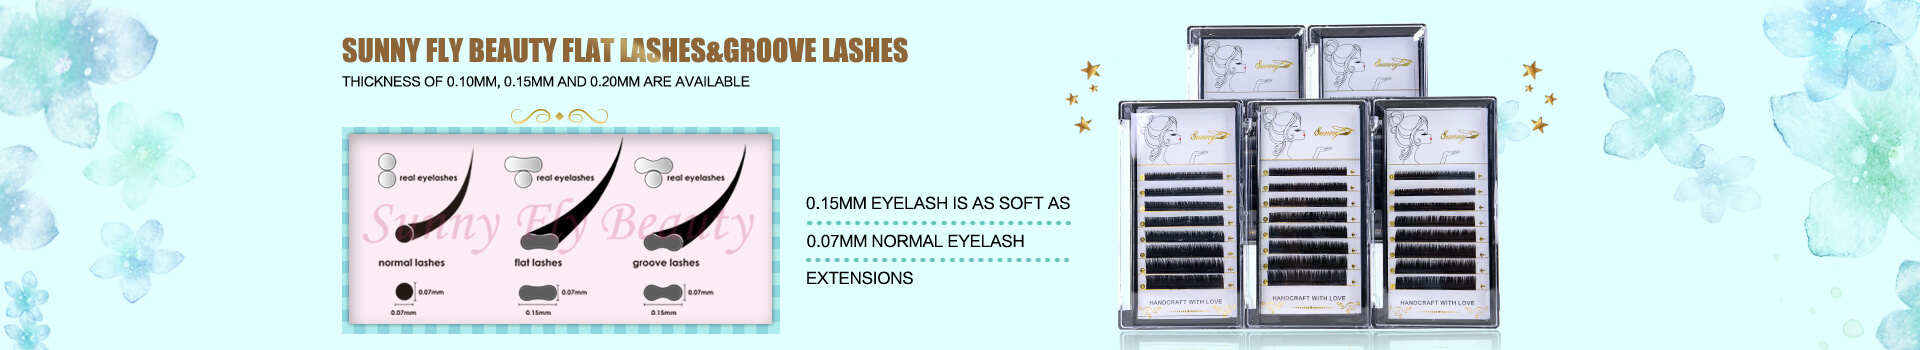 Flad Lashes & Groove Lashes